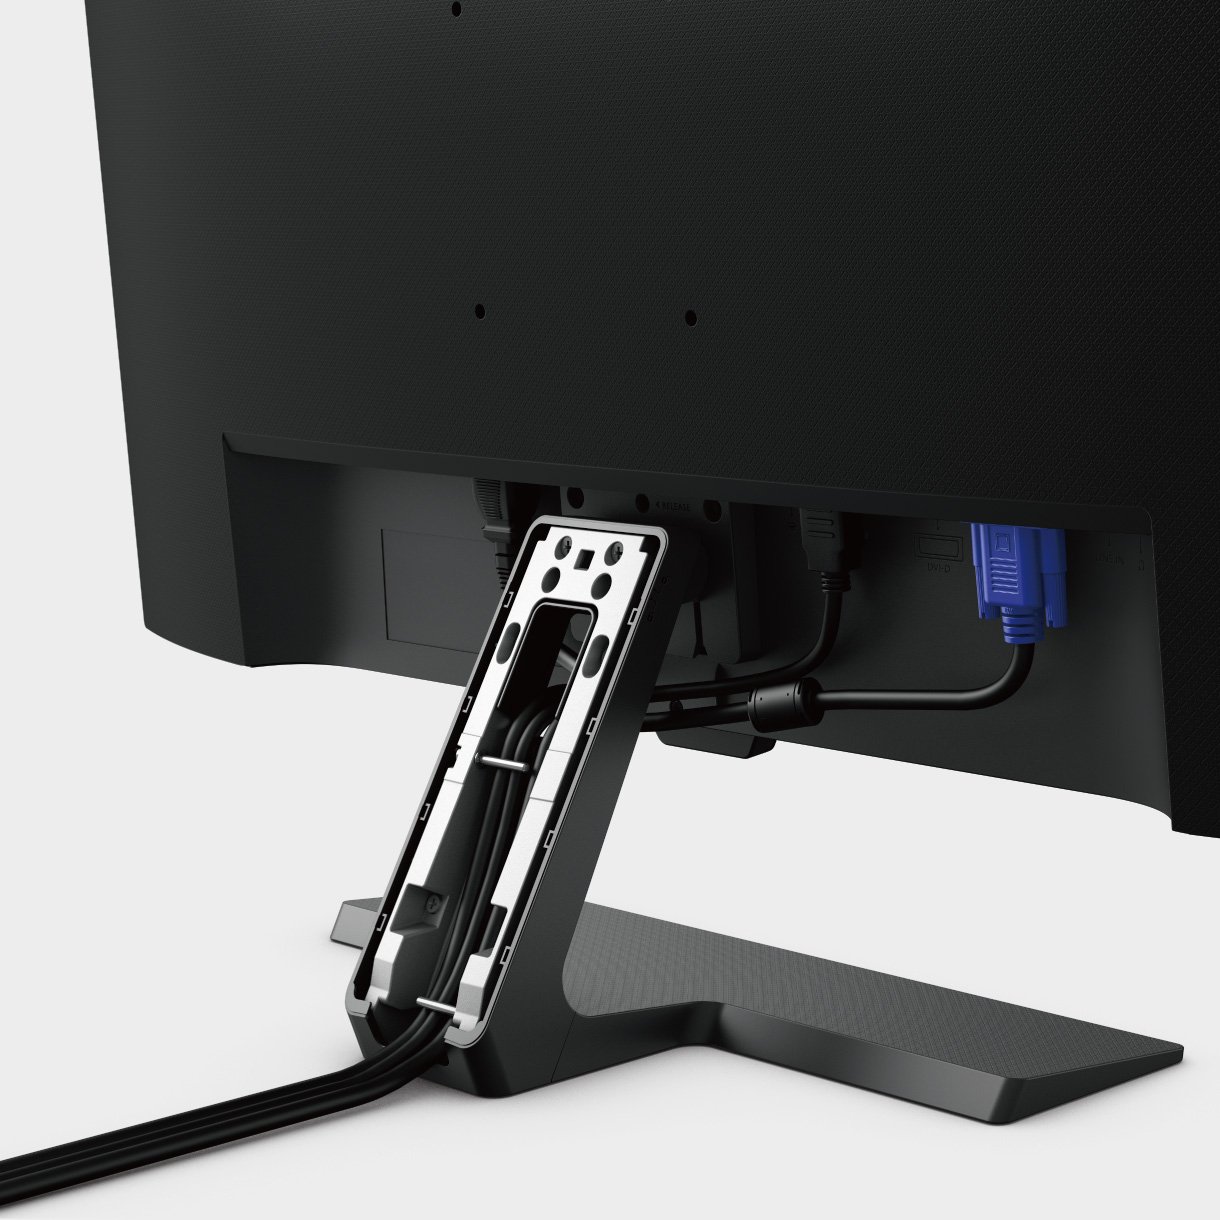 benq gw2480 with invisible cable management system hides all wires inside the monitor stand for cleanest look